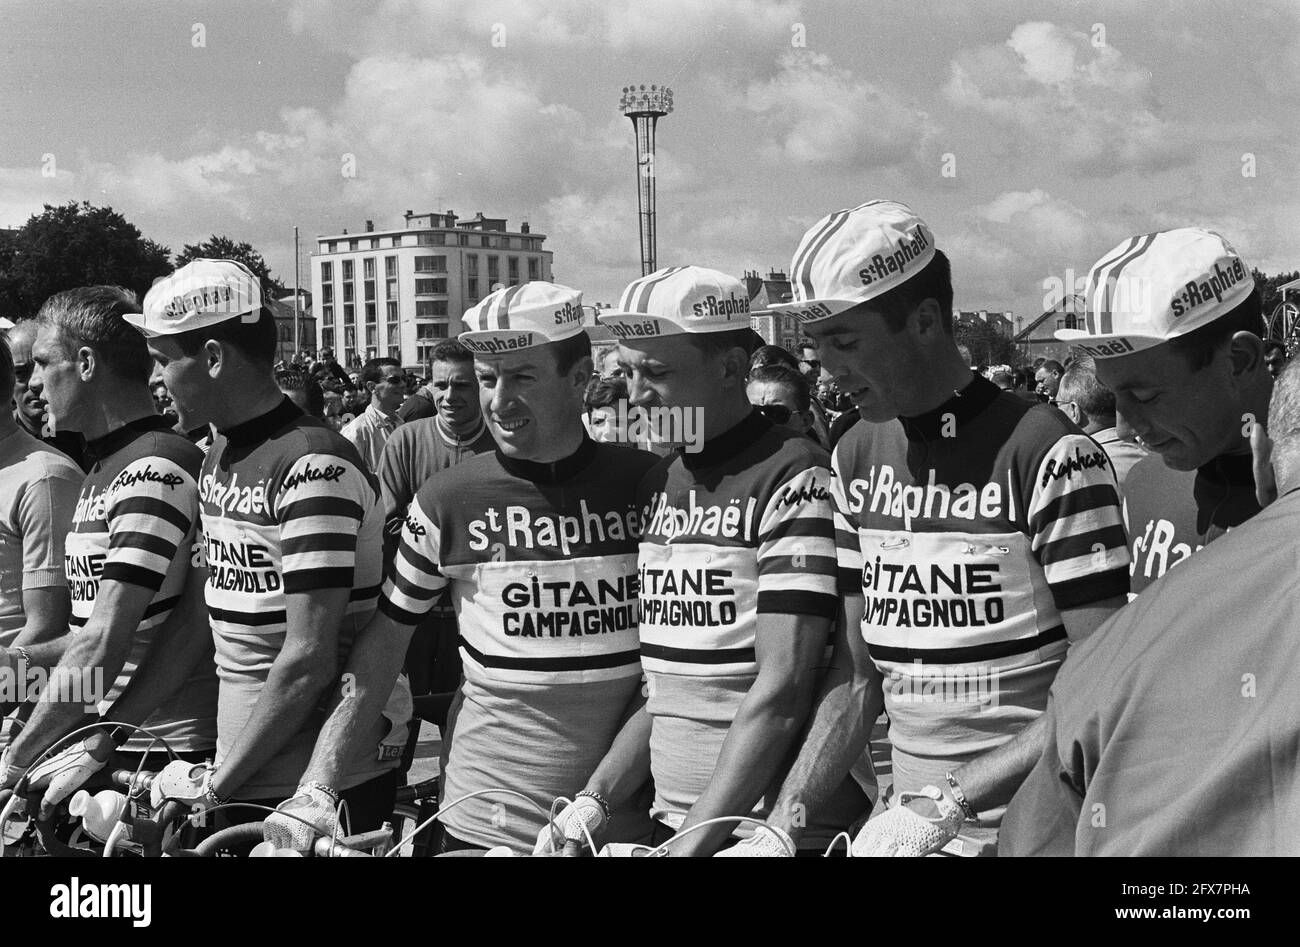 51st Tour de France 1964, The St. Raphael-Gitanes team, June 22, 1964, group portraits, sports, cycling, The Netherlands, 20th century press agency photo, news to remember, documentary, historic photography 1945-1990, visual stories, human history of the Twentieth Century, capturing moments in time Stock Photo